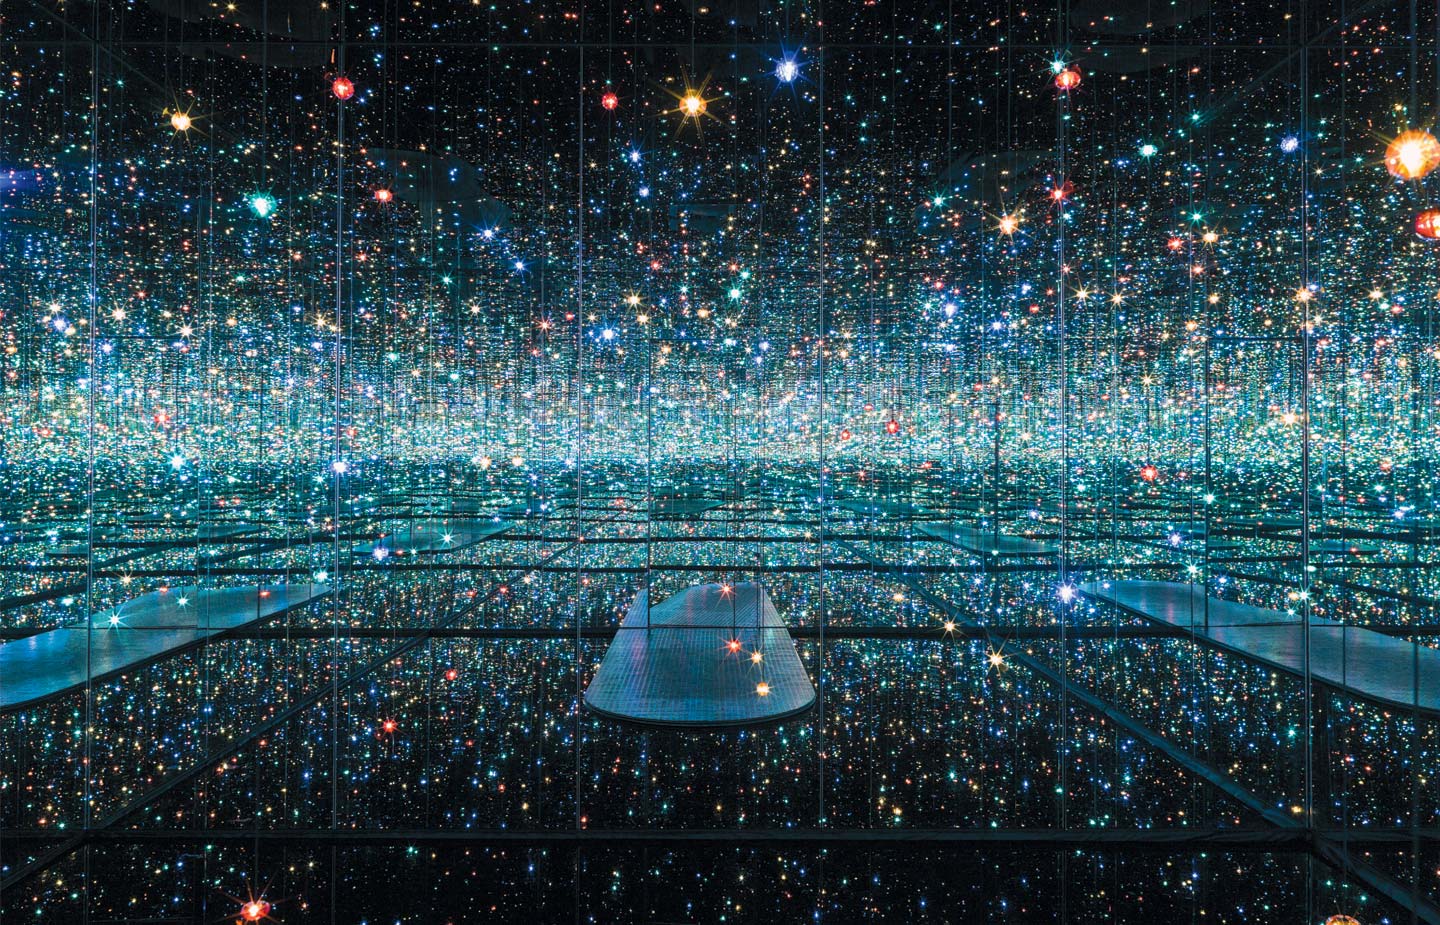 Infinity Mirrored Room – The Souls of Millions of Light Years Away, 2013. Wood, metal, glass mirrors, plastic, acrylic panel, rubber, LED lighting system, acrylic balls and water, 113 1/4 x 163 1/2 x 163 1/2 in.  Courtesy of David Zwirner, N.Y. © Yayoi Kusama